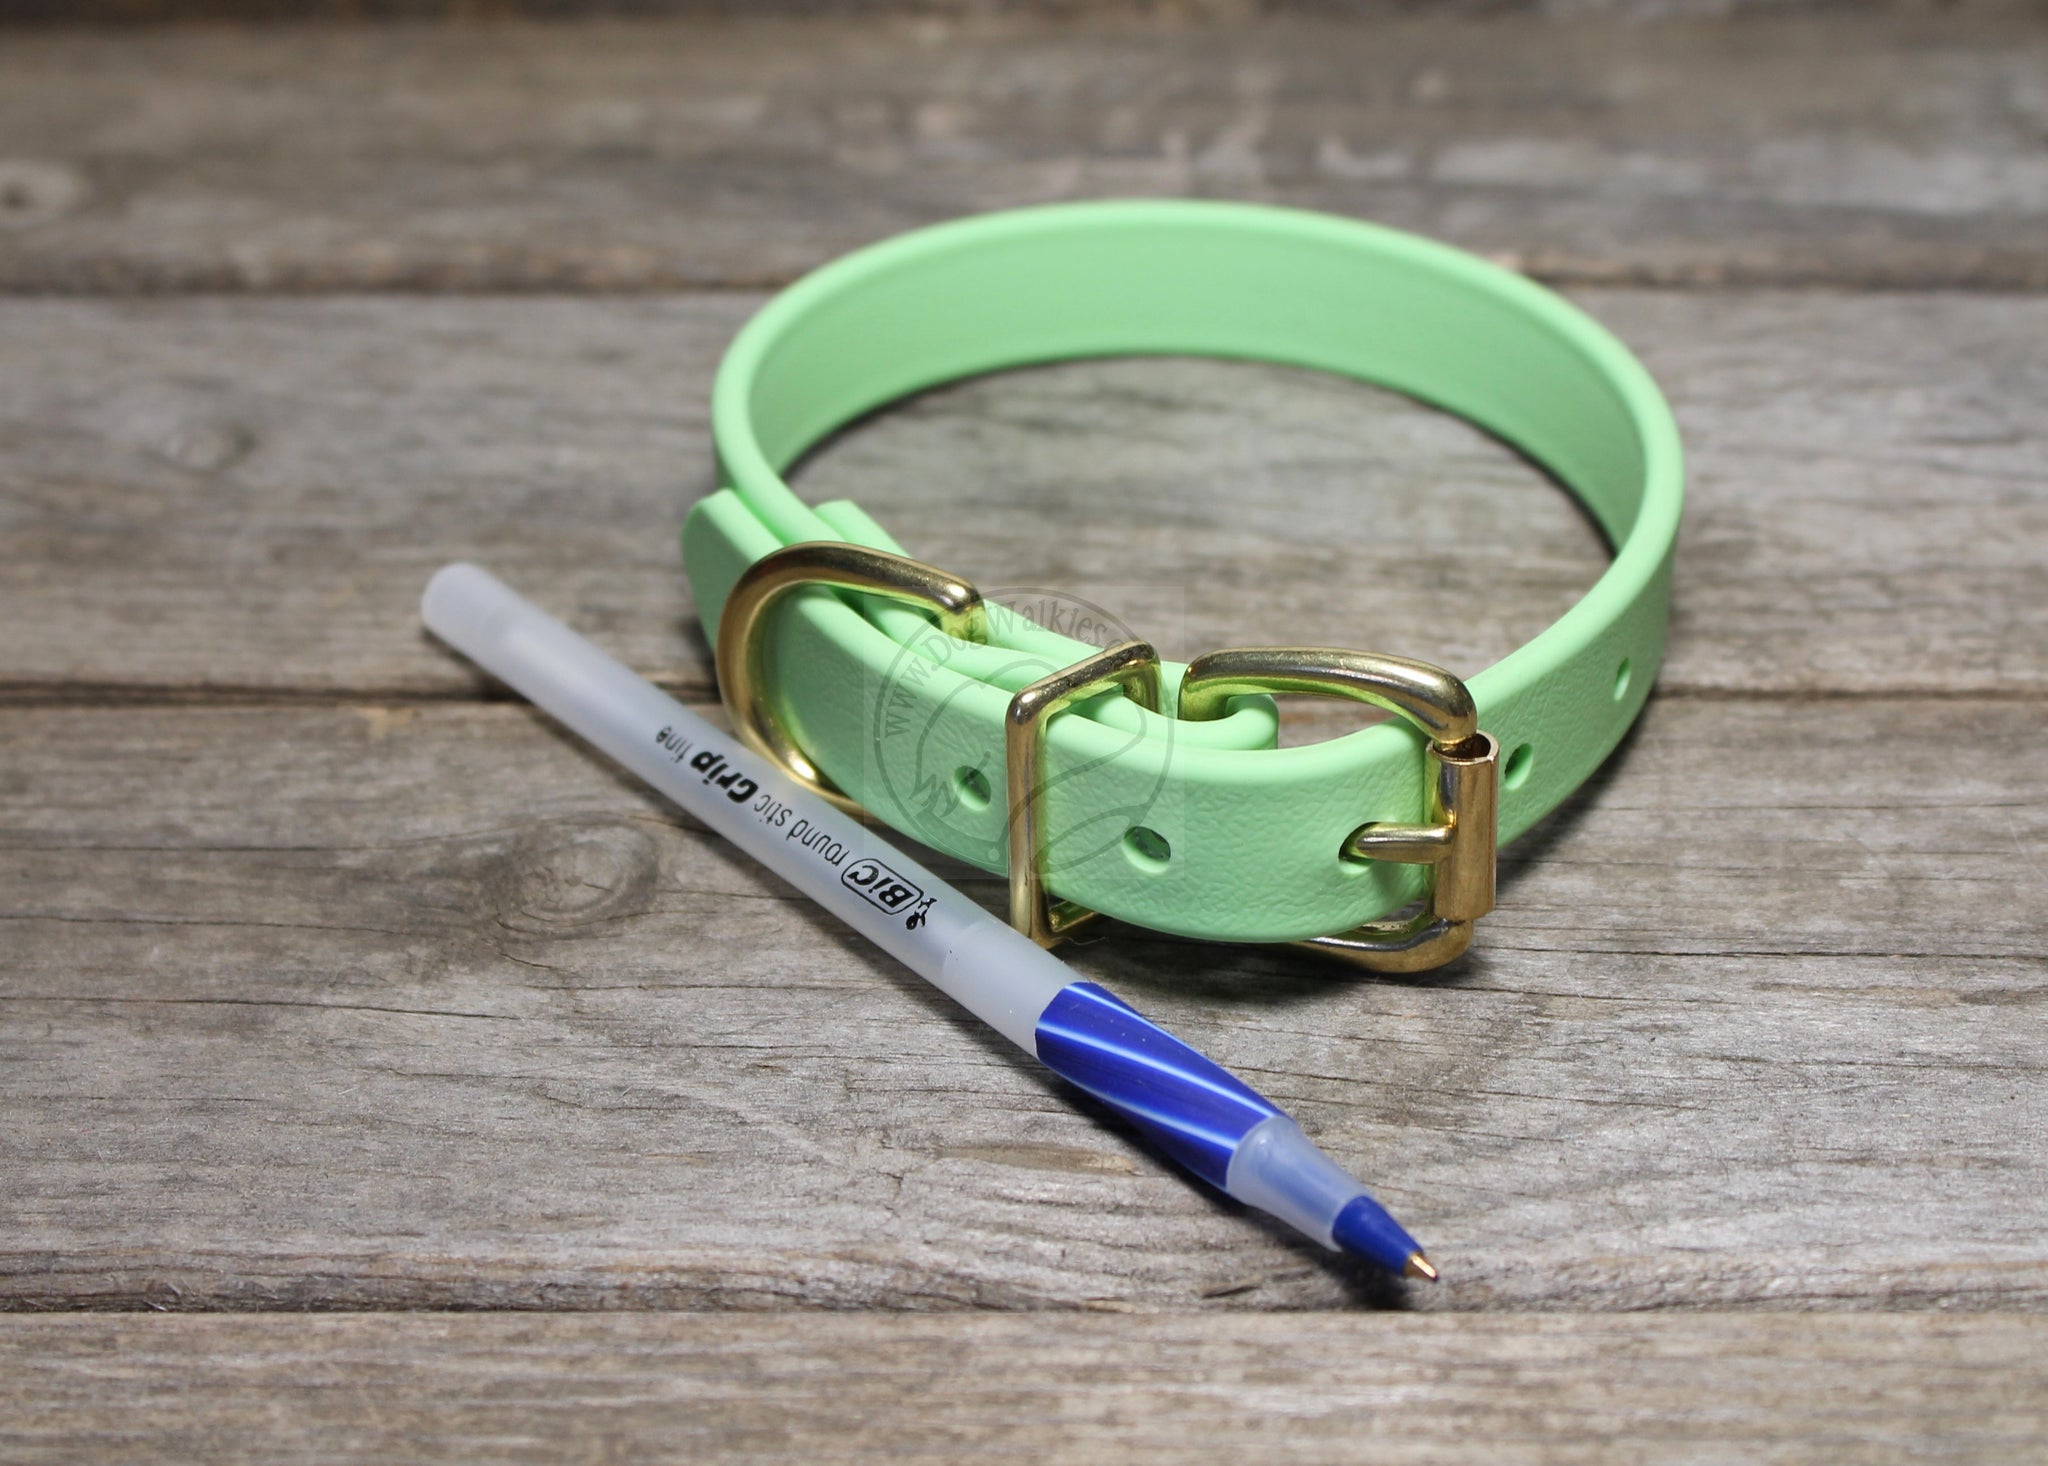 Discontinued- Limited Pastel Mint Green Biothane Dog Collar - 3/4" (20mm) wide